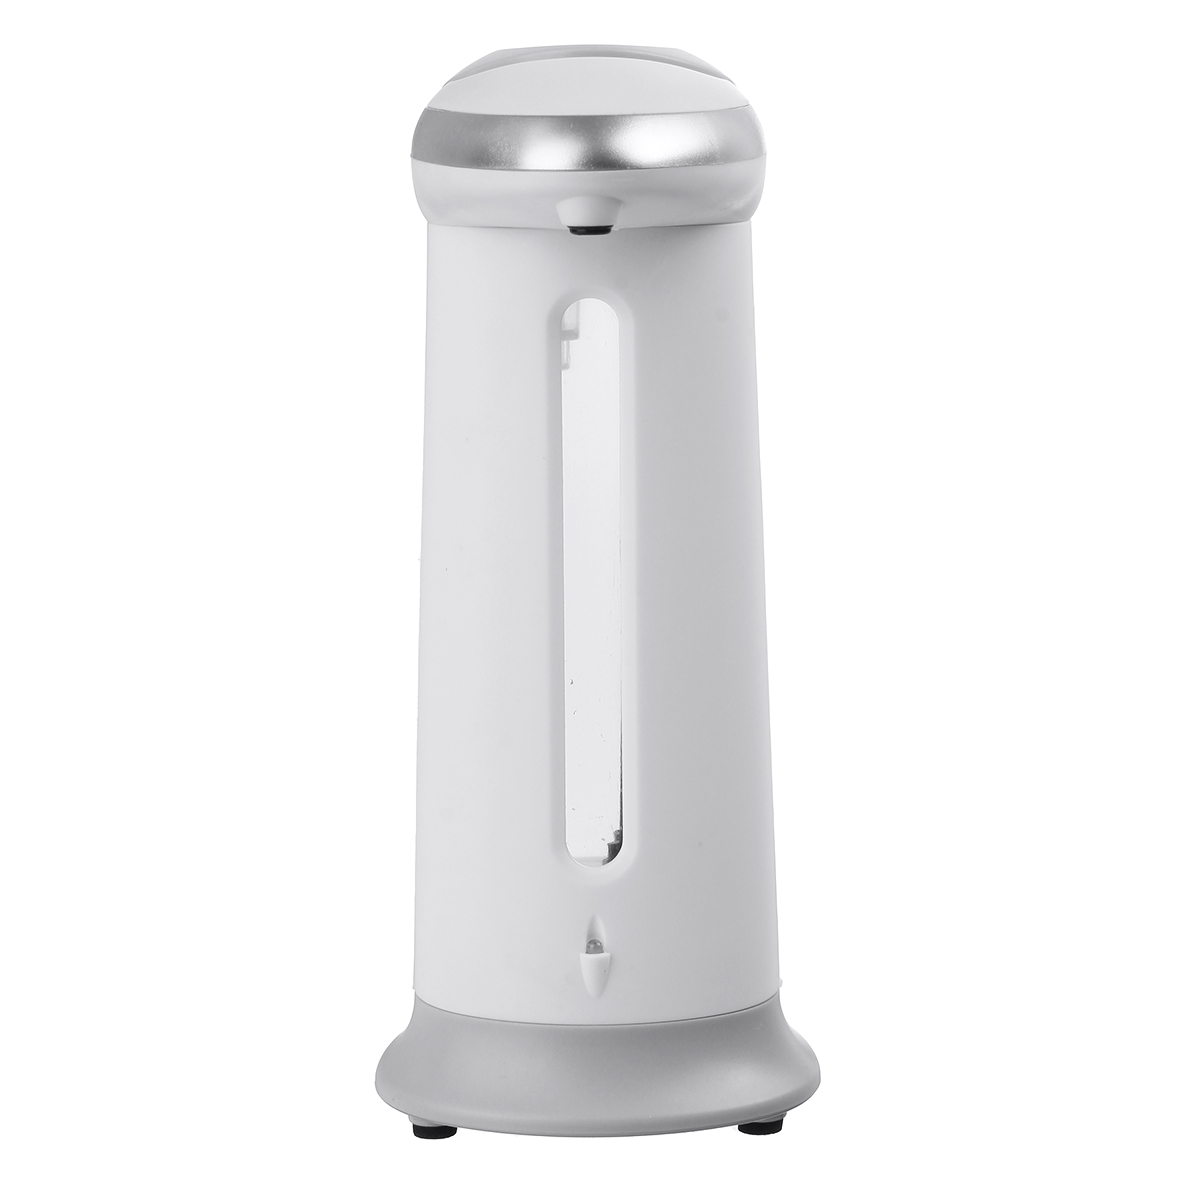 Soap-Dispenser-Automatic-Lotion-Dispenser-Infrared-Sensor-Automatic-No-Touch-1690580-4